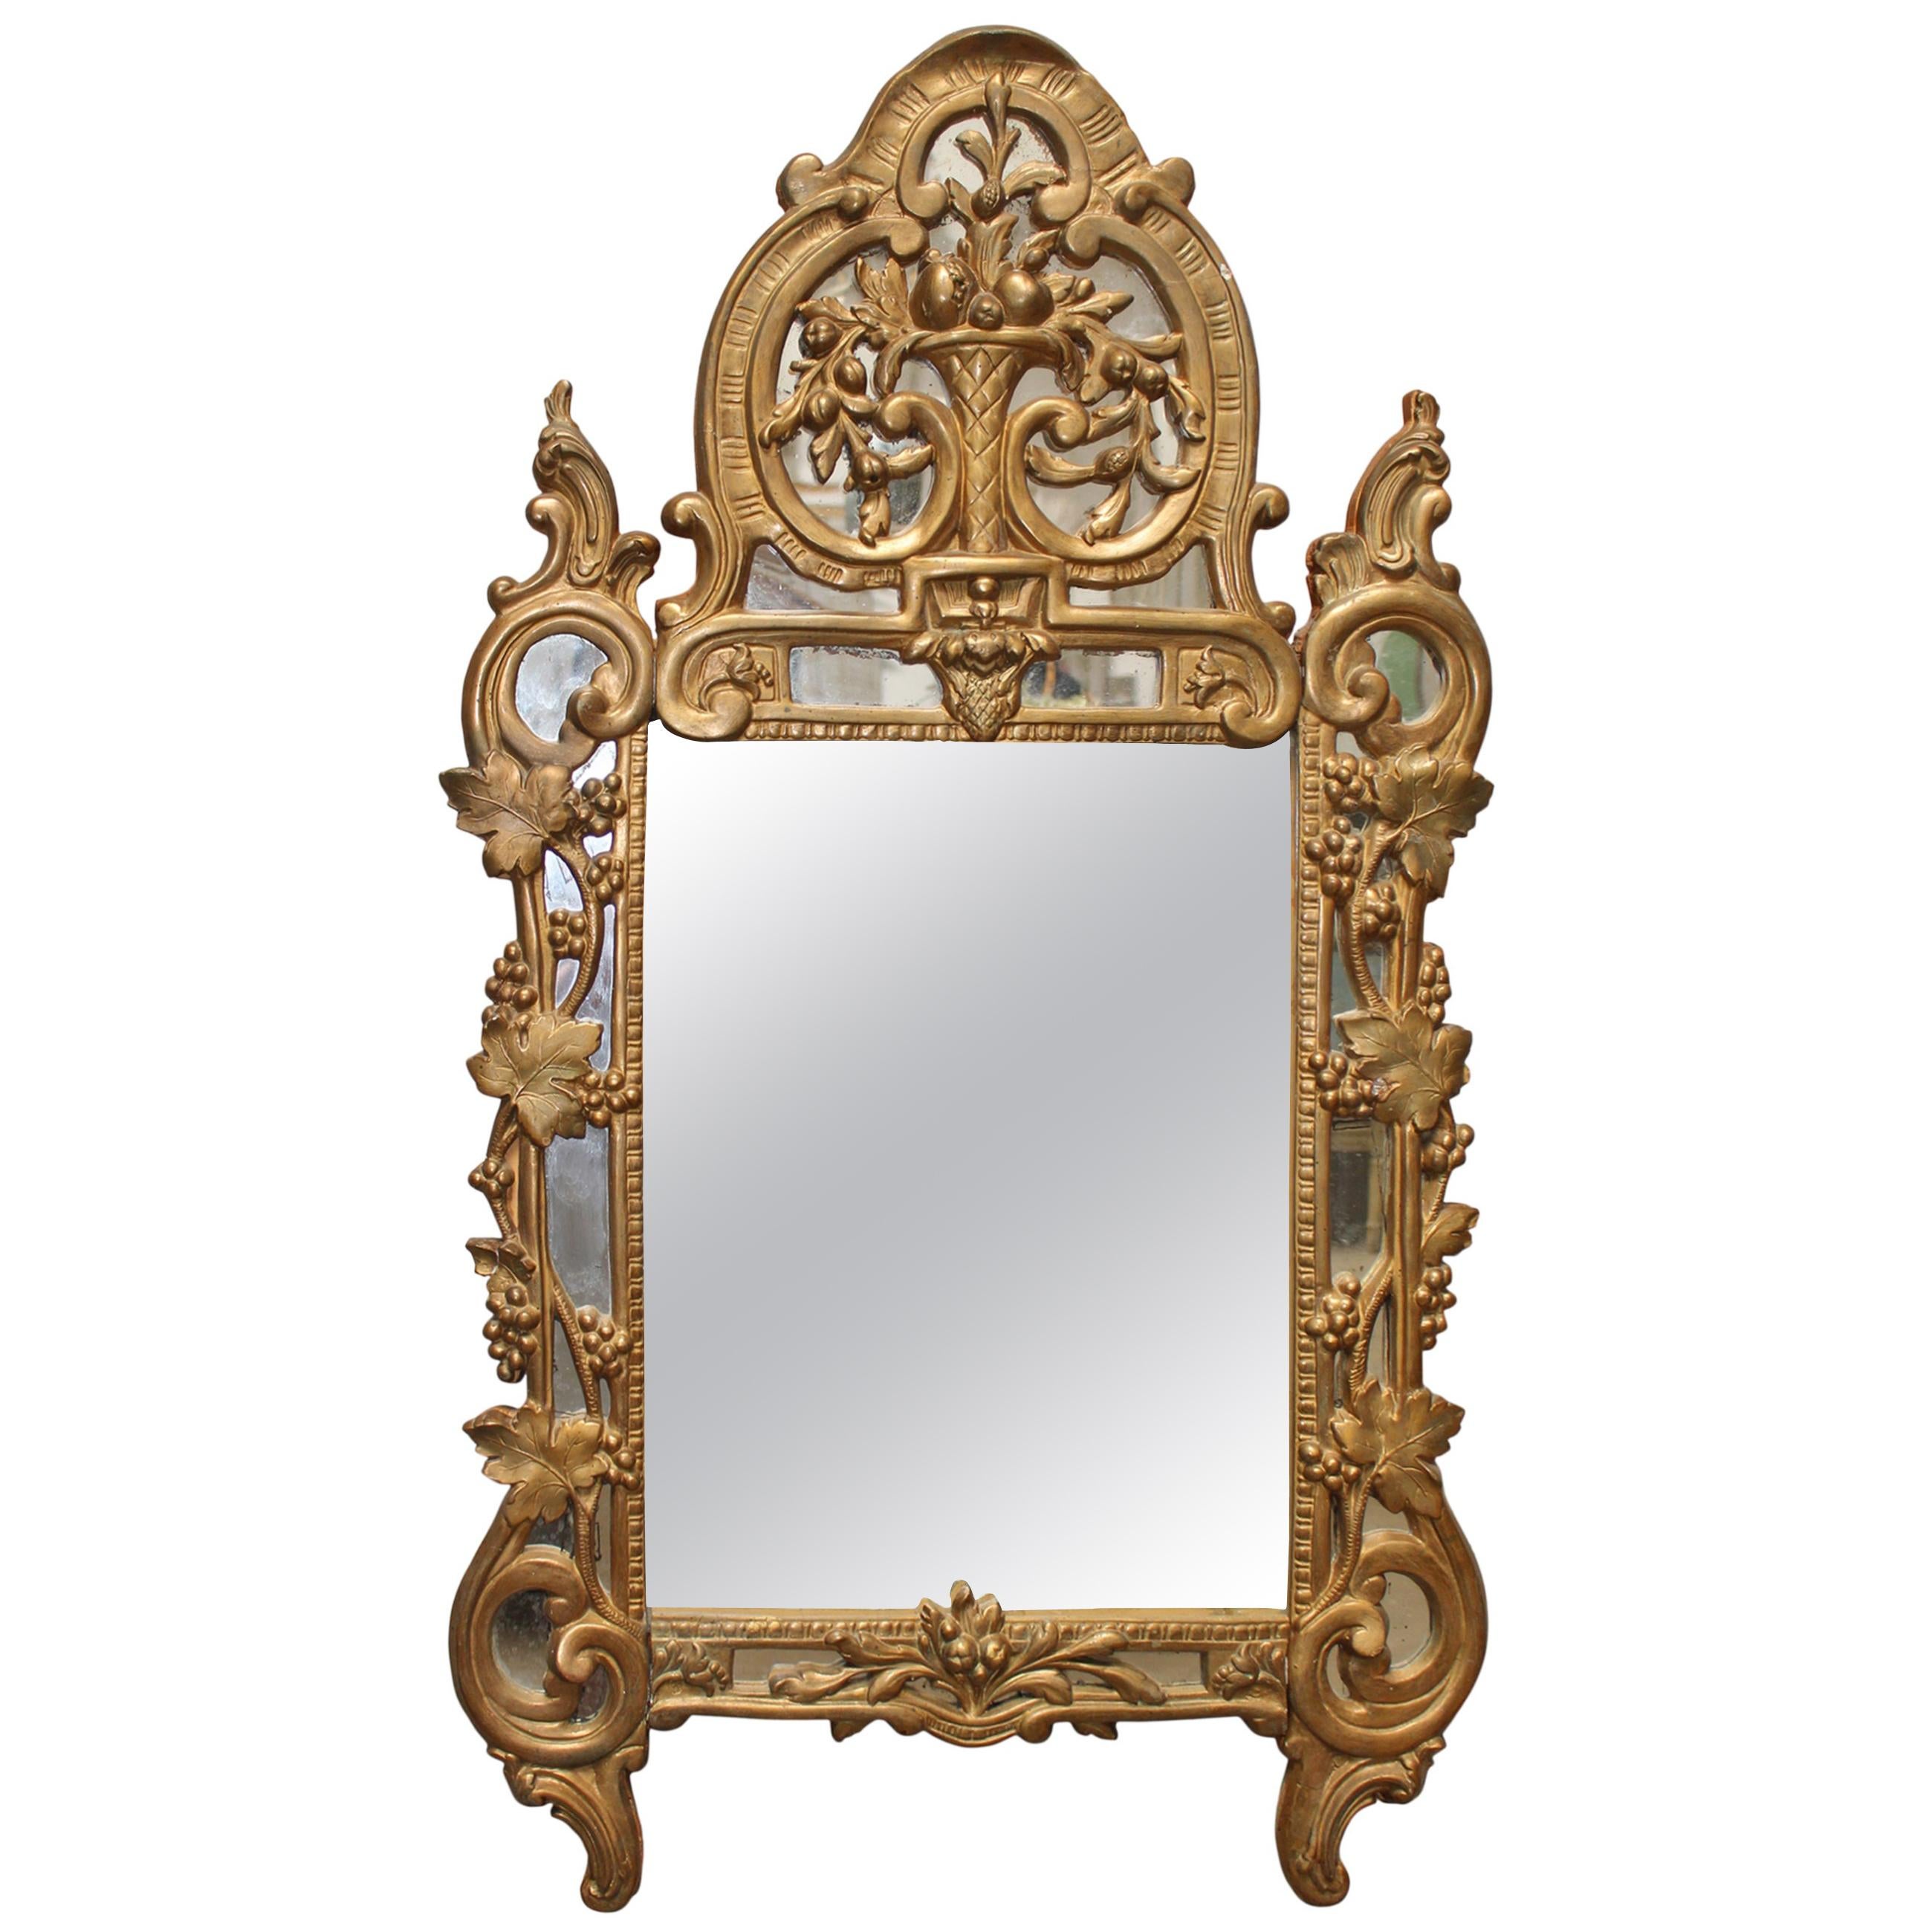 18th Century French Regence Mirror with a Gold Leaf Finish